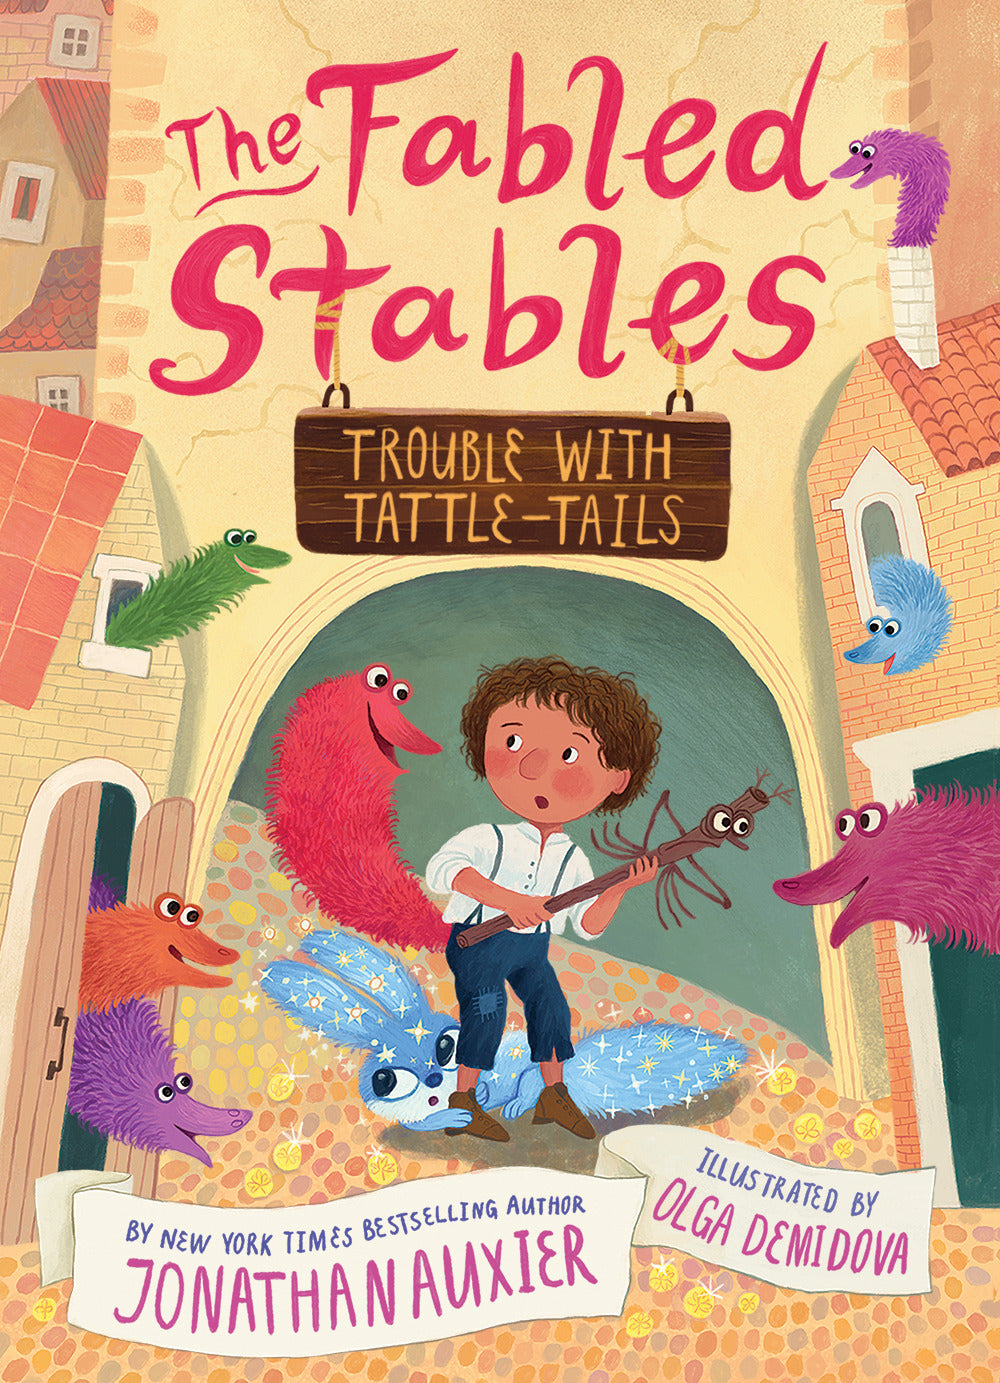 The Fabled Stables: Trouble with Tattle-Tails